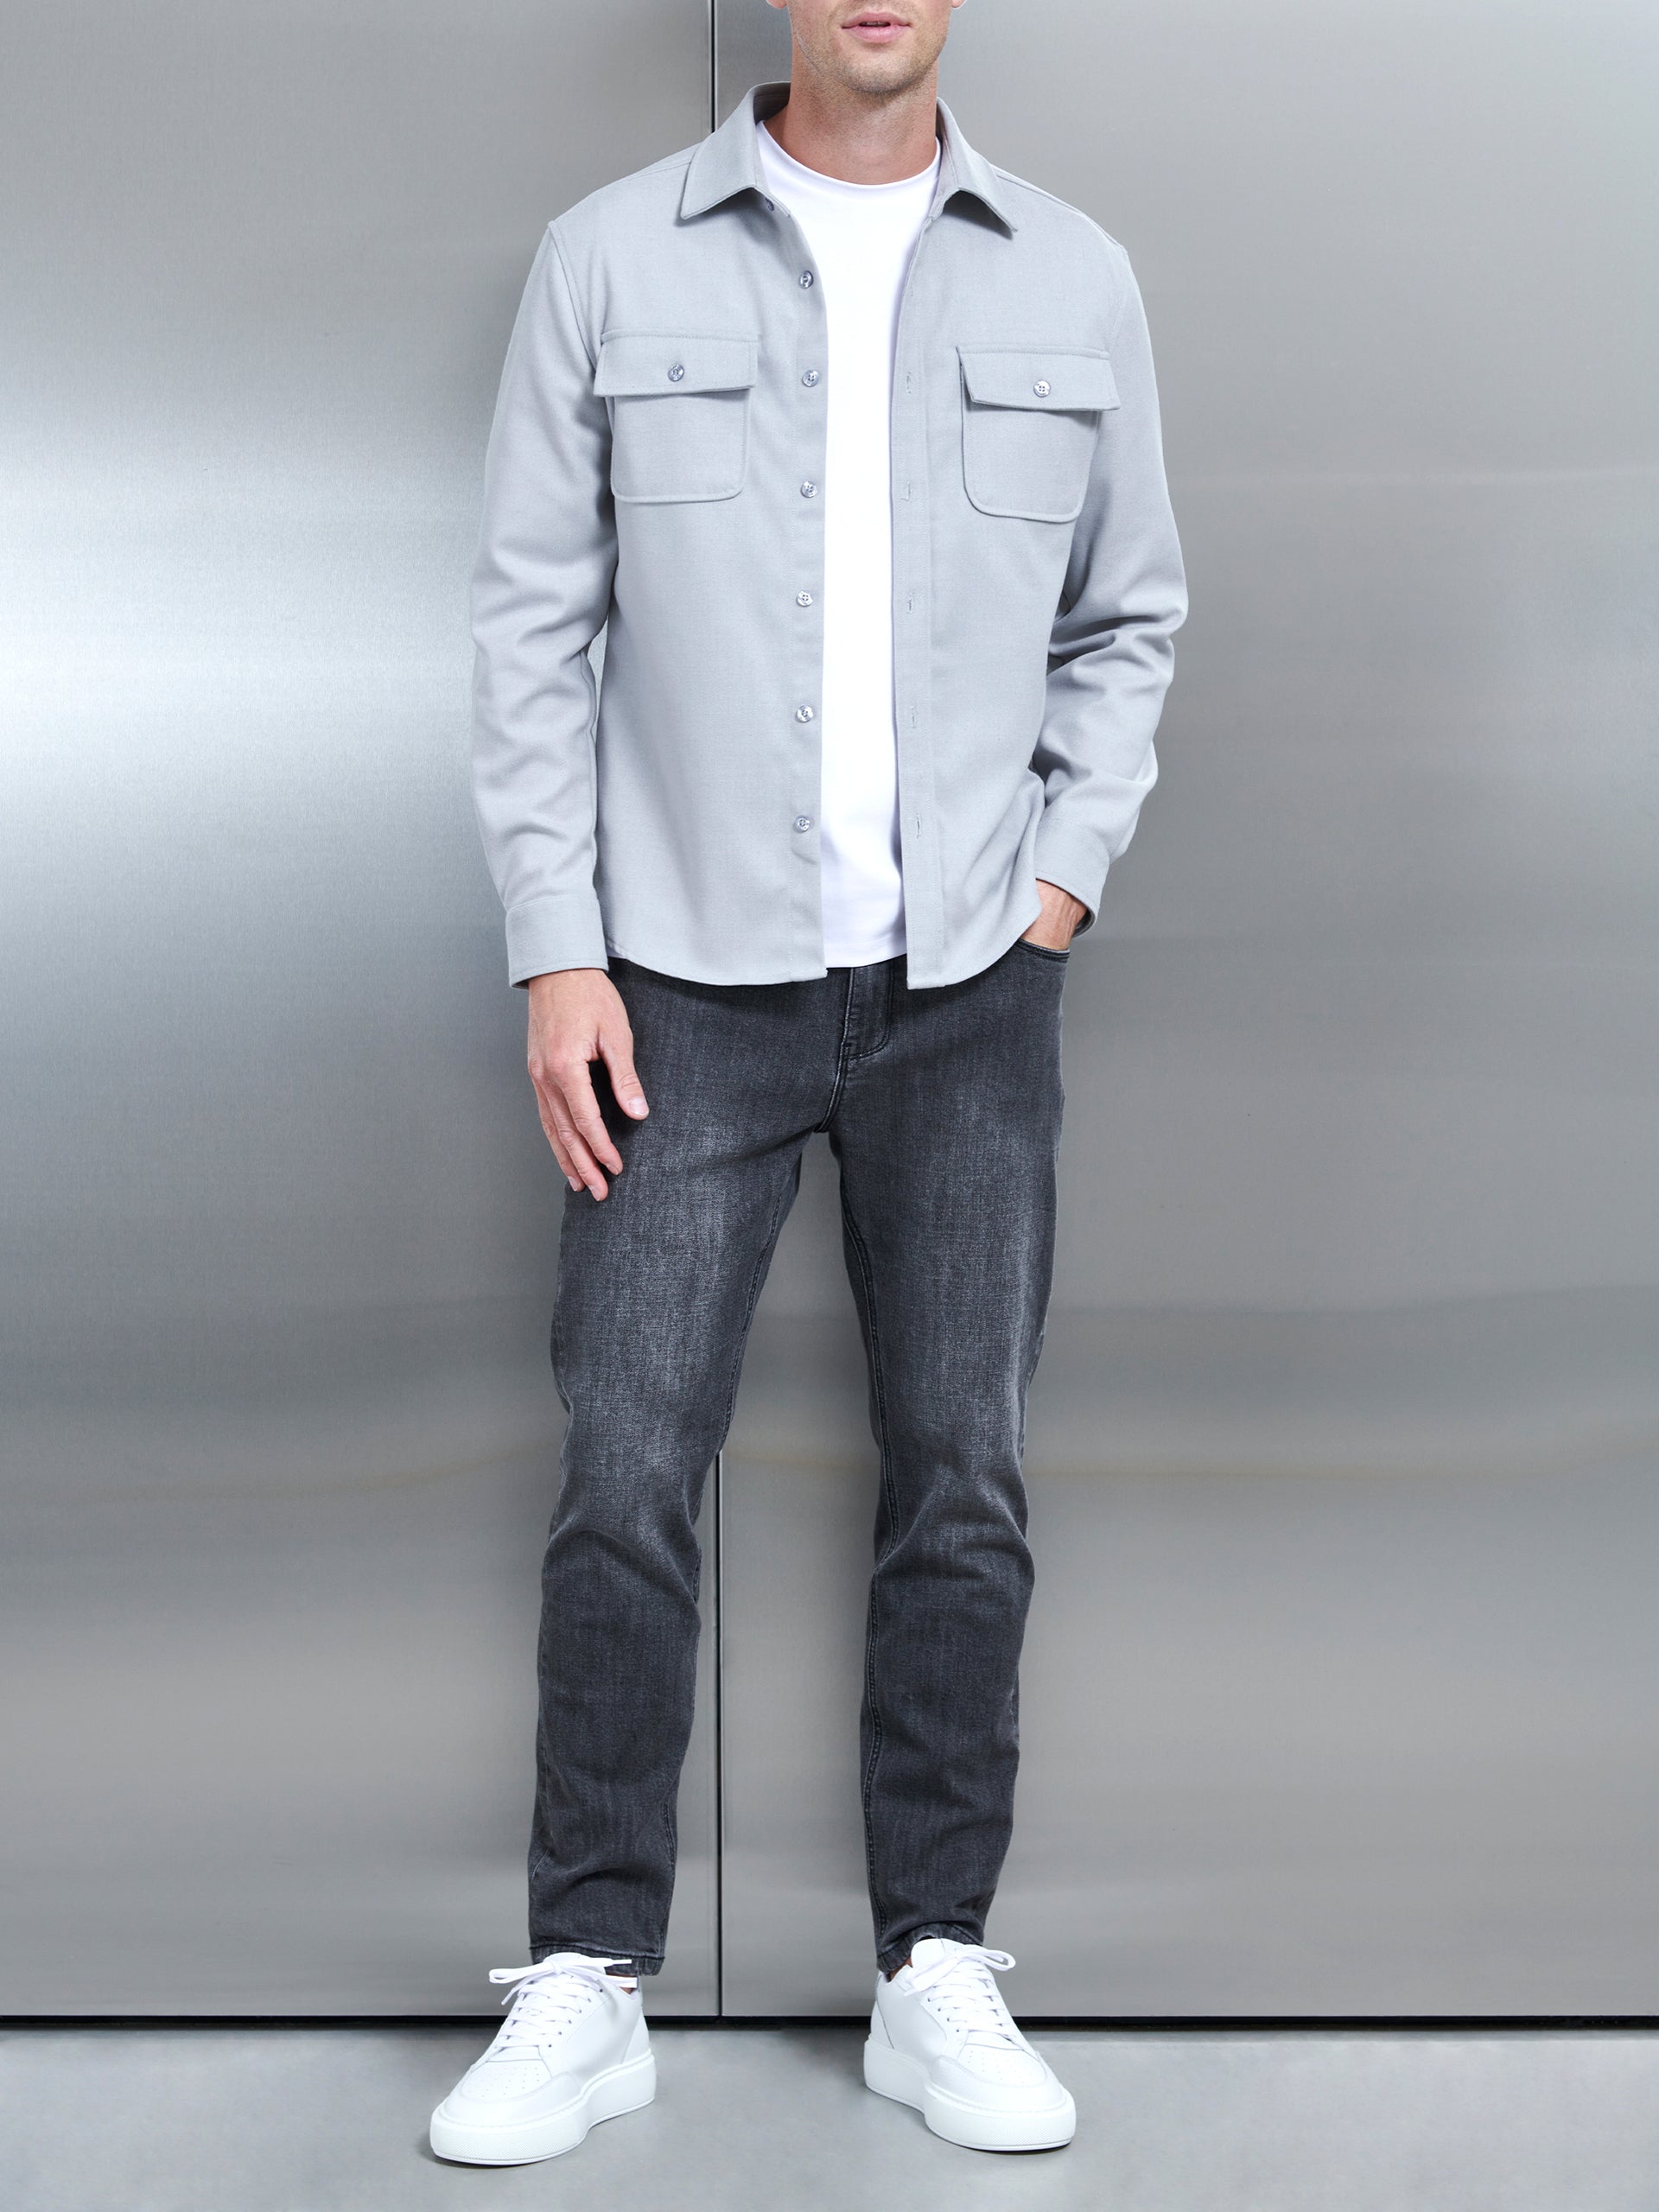 Jeans & Trousers | light blue relaxed fit denim jeans | Freeup